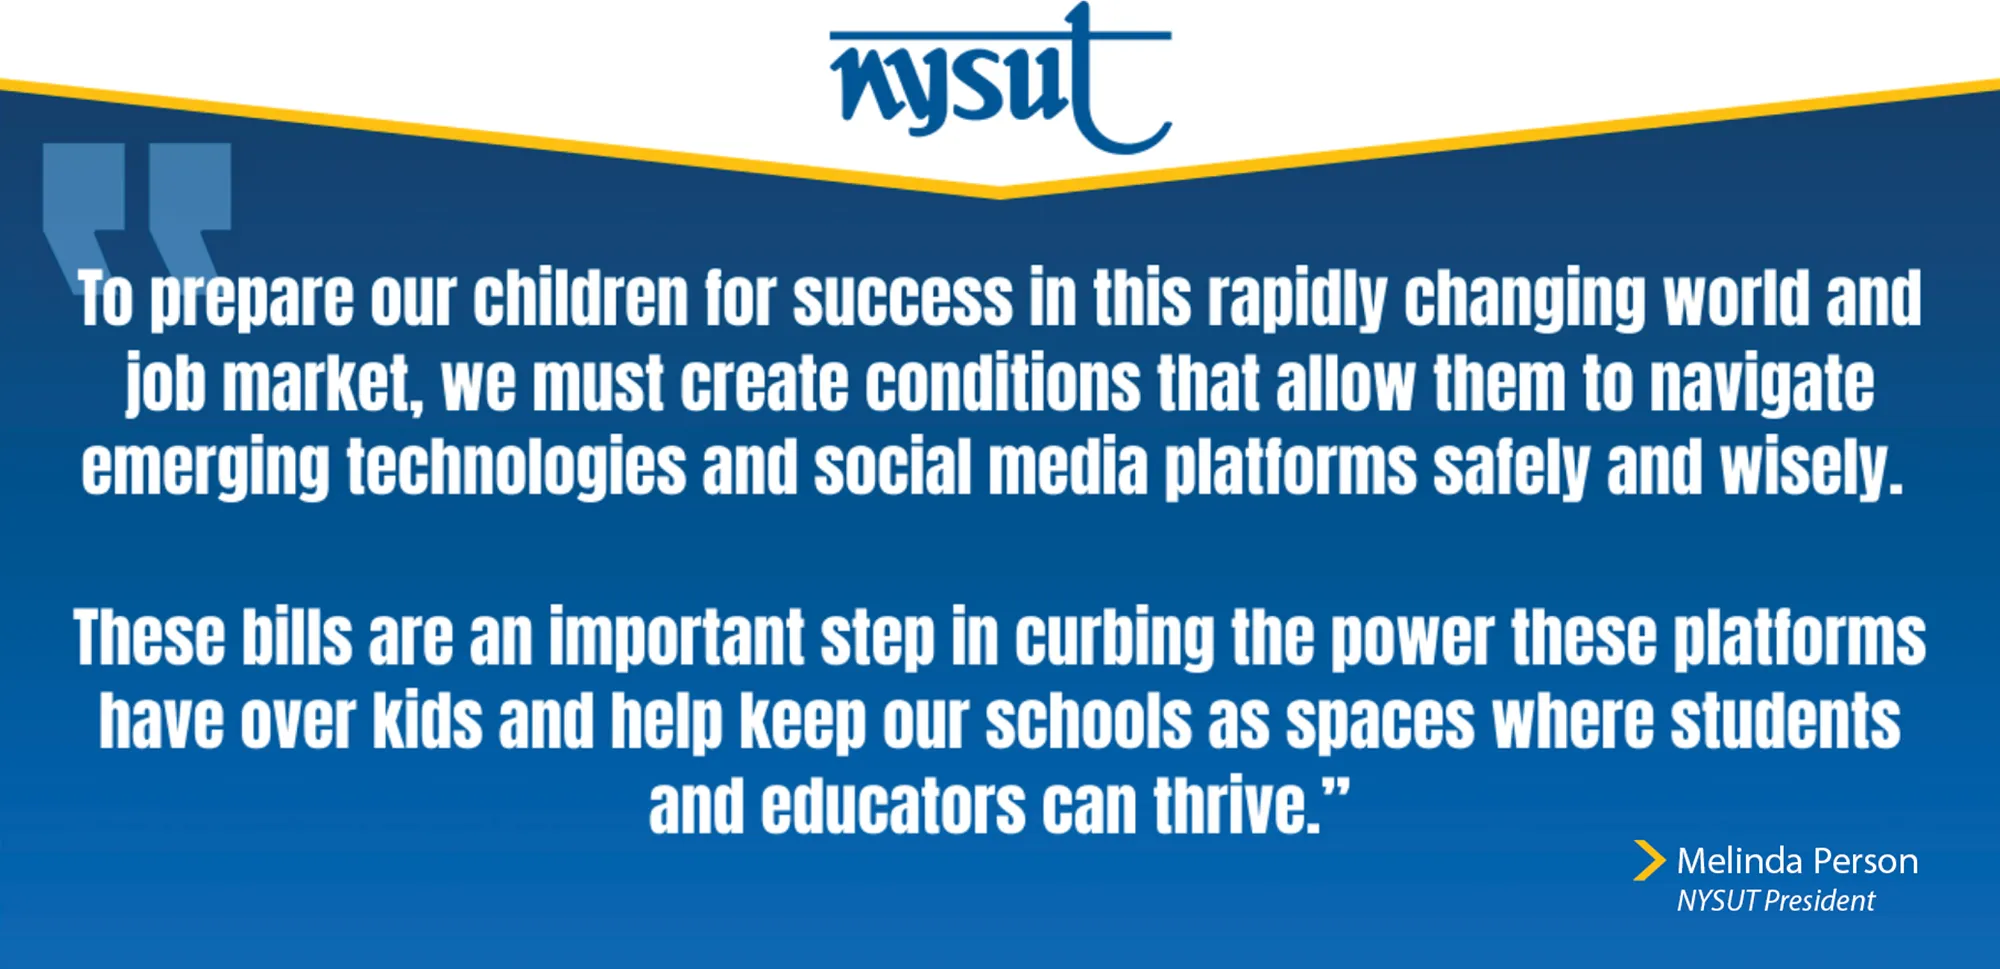 To prepare our children for success in this rapidly changing world and job market, we must create conditions that allow them to navigate emerging technologies and social media platforms safely and wisely. These bills are an important step in curbing the power these platforms have over kids and help keep our schools as spaces where students and educators can thrive. Melinda Person, NYSUT President